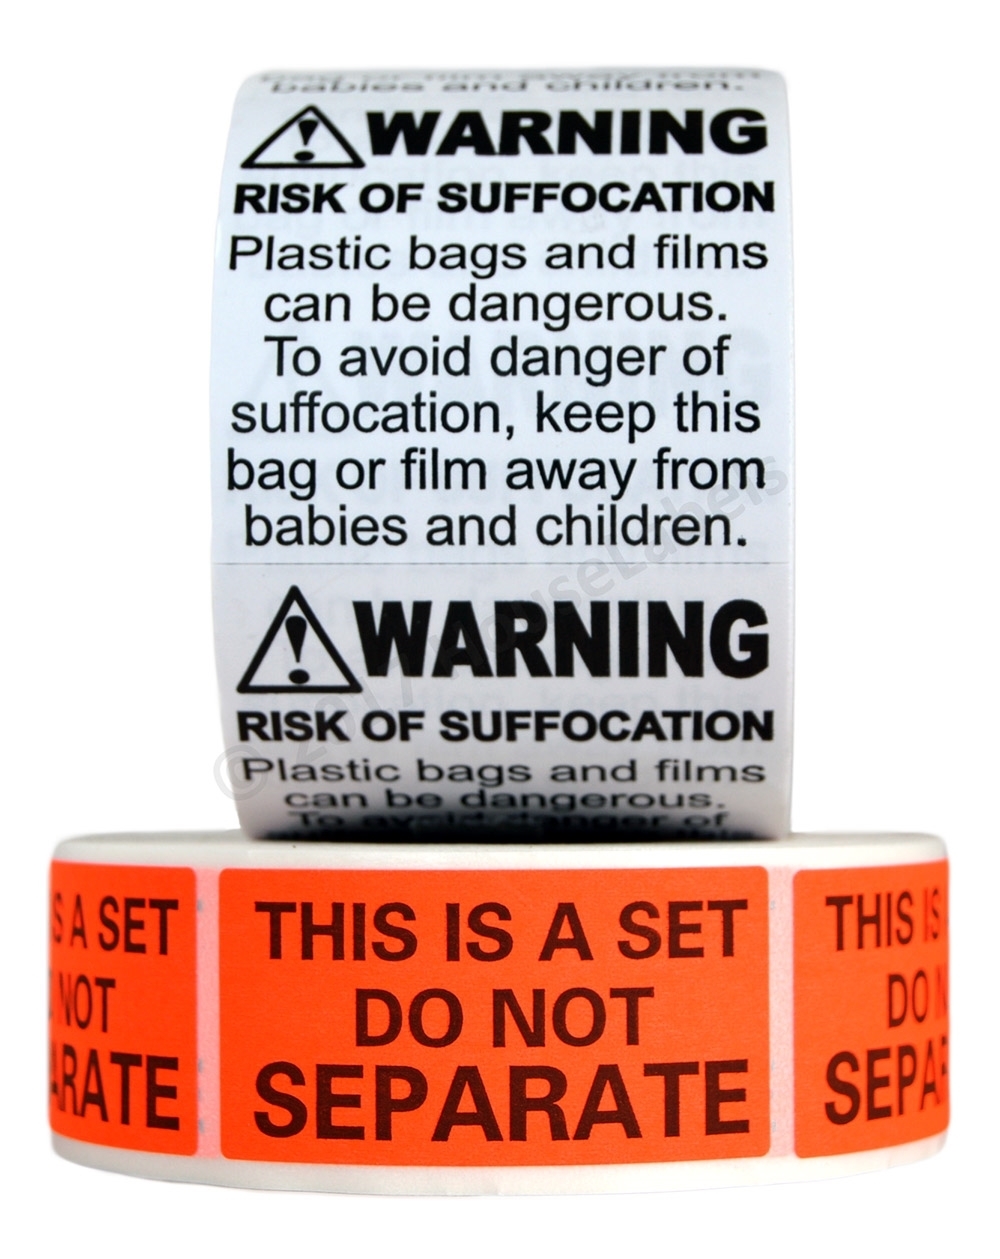 32-suffocation-warning-label-template-label-design-ideas-2020